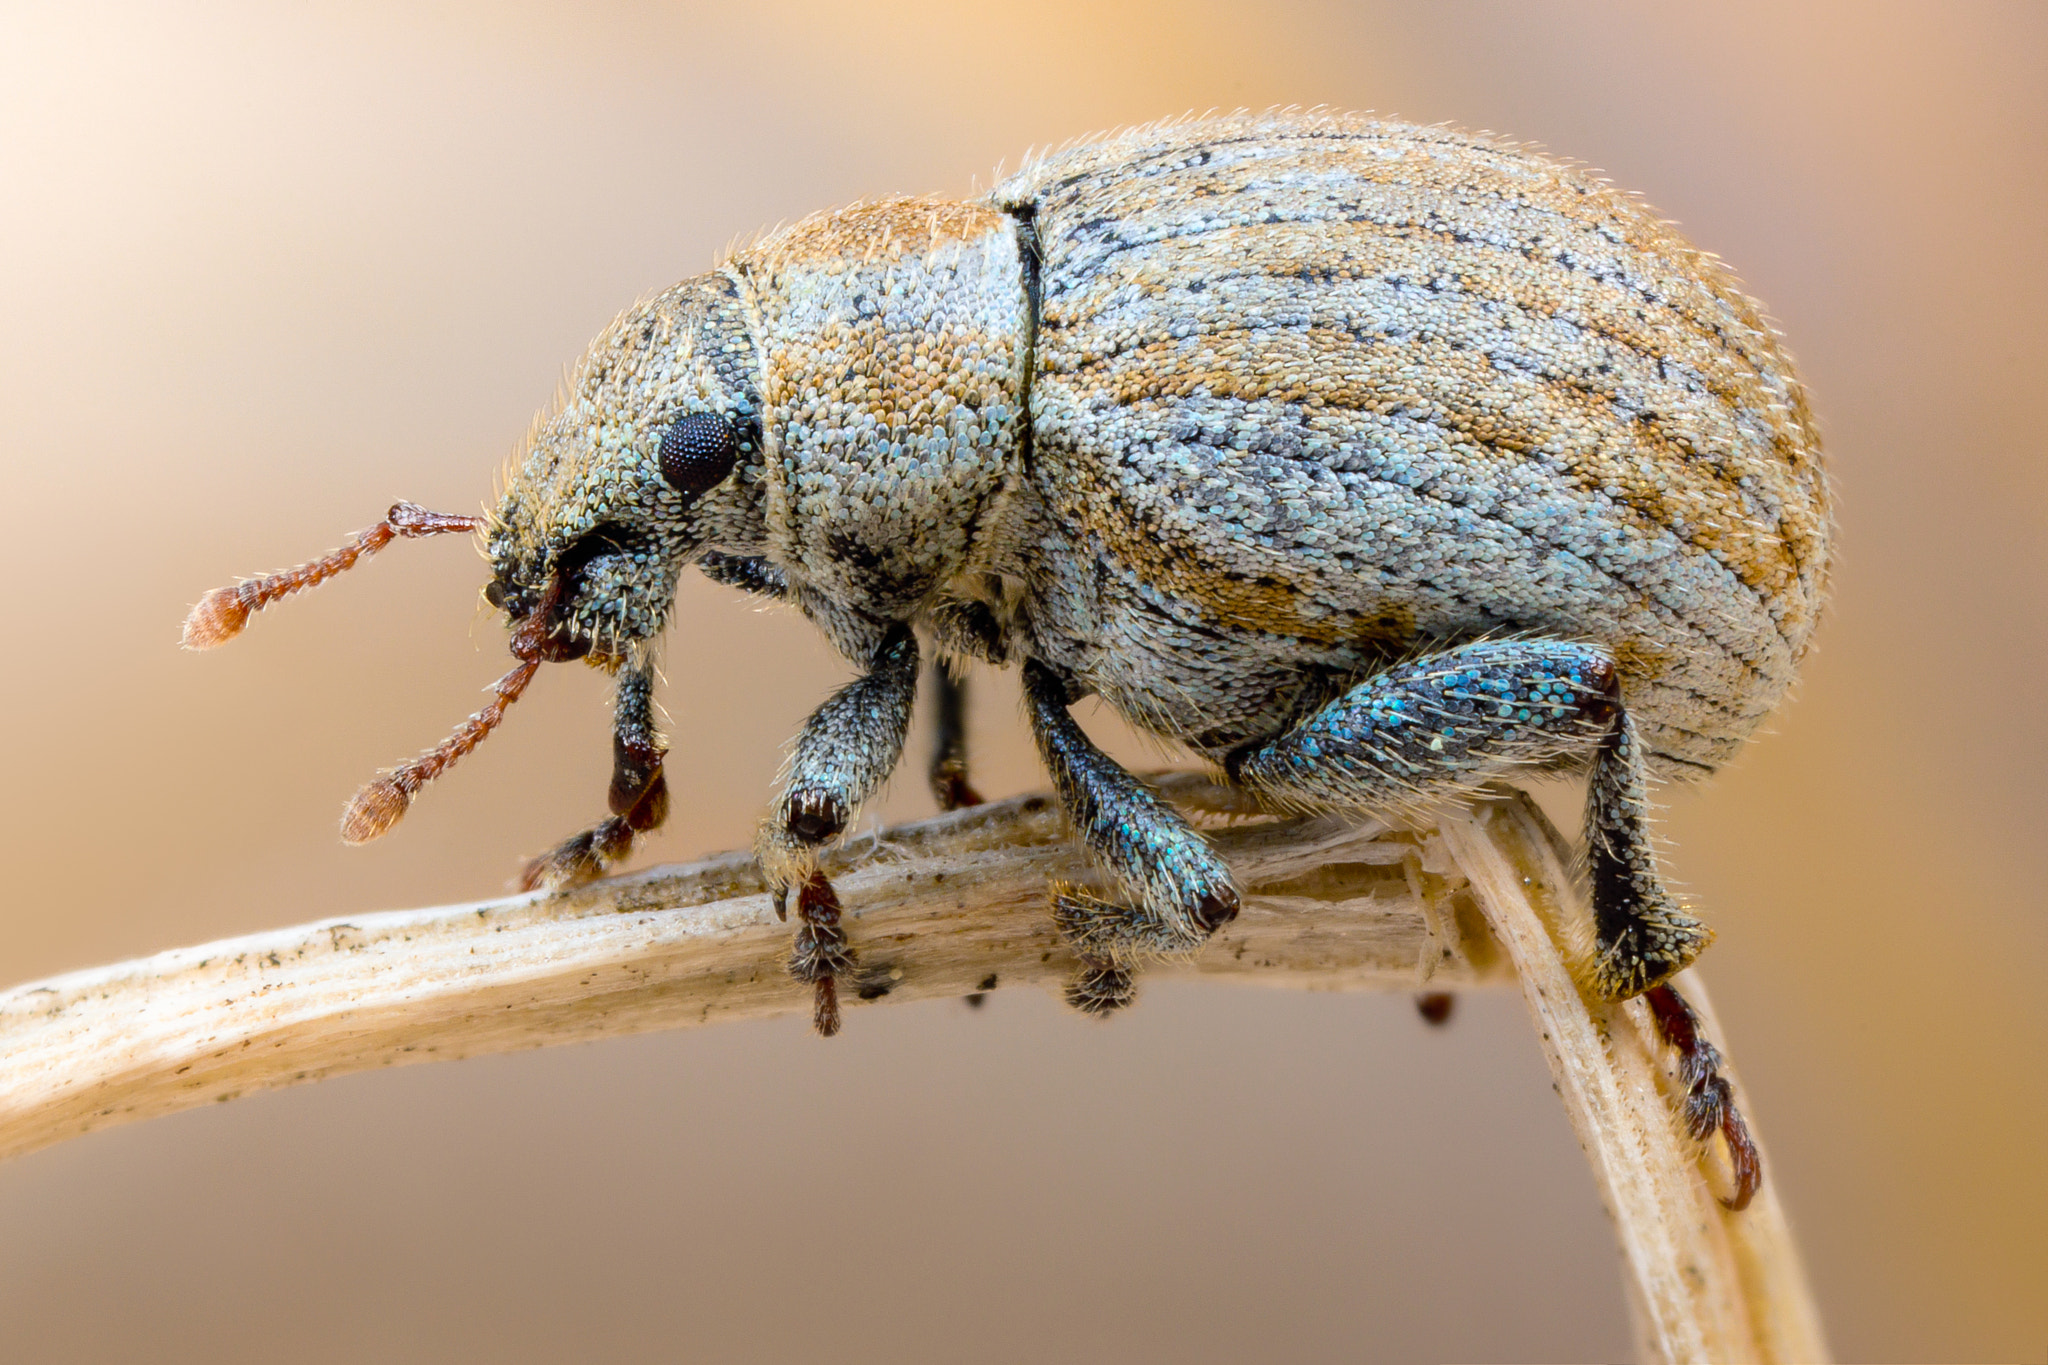 65mm F2.8 sample photo. Sand weevil photography